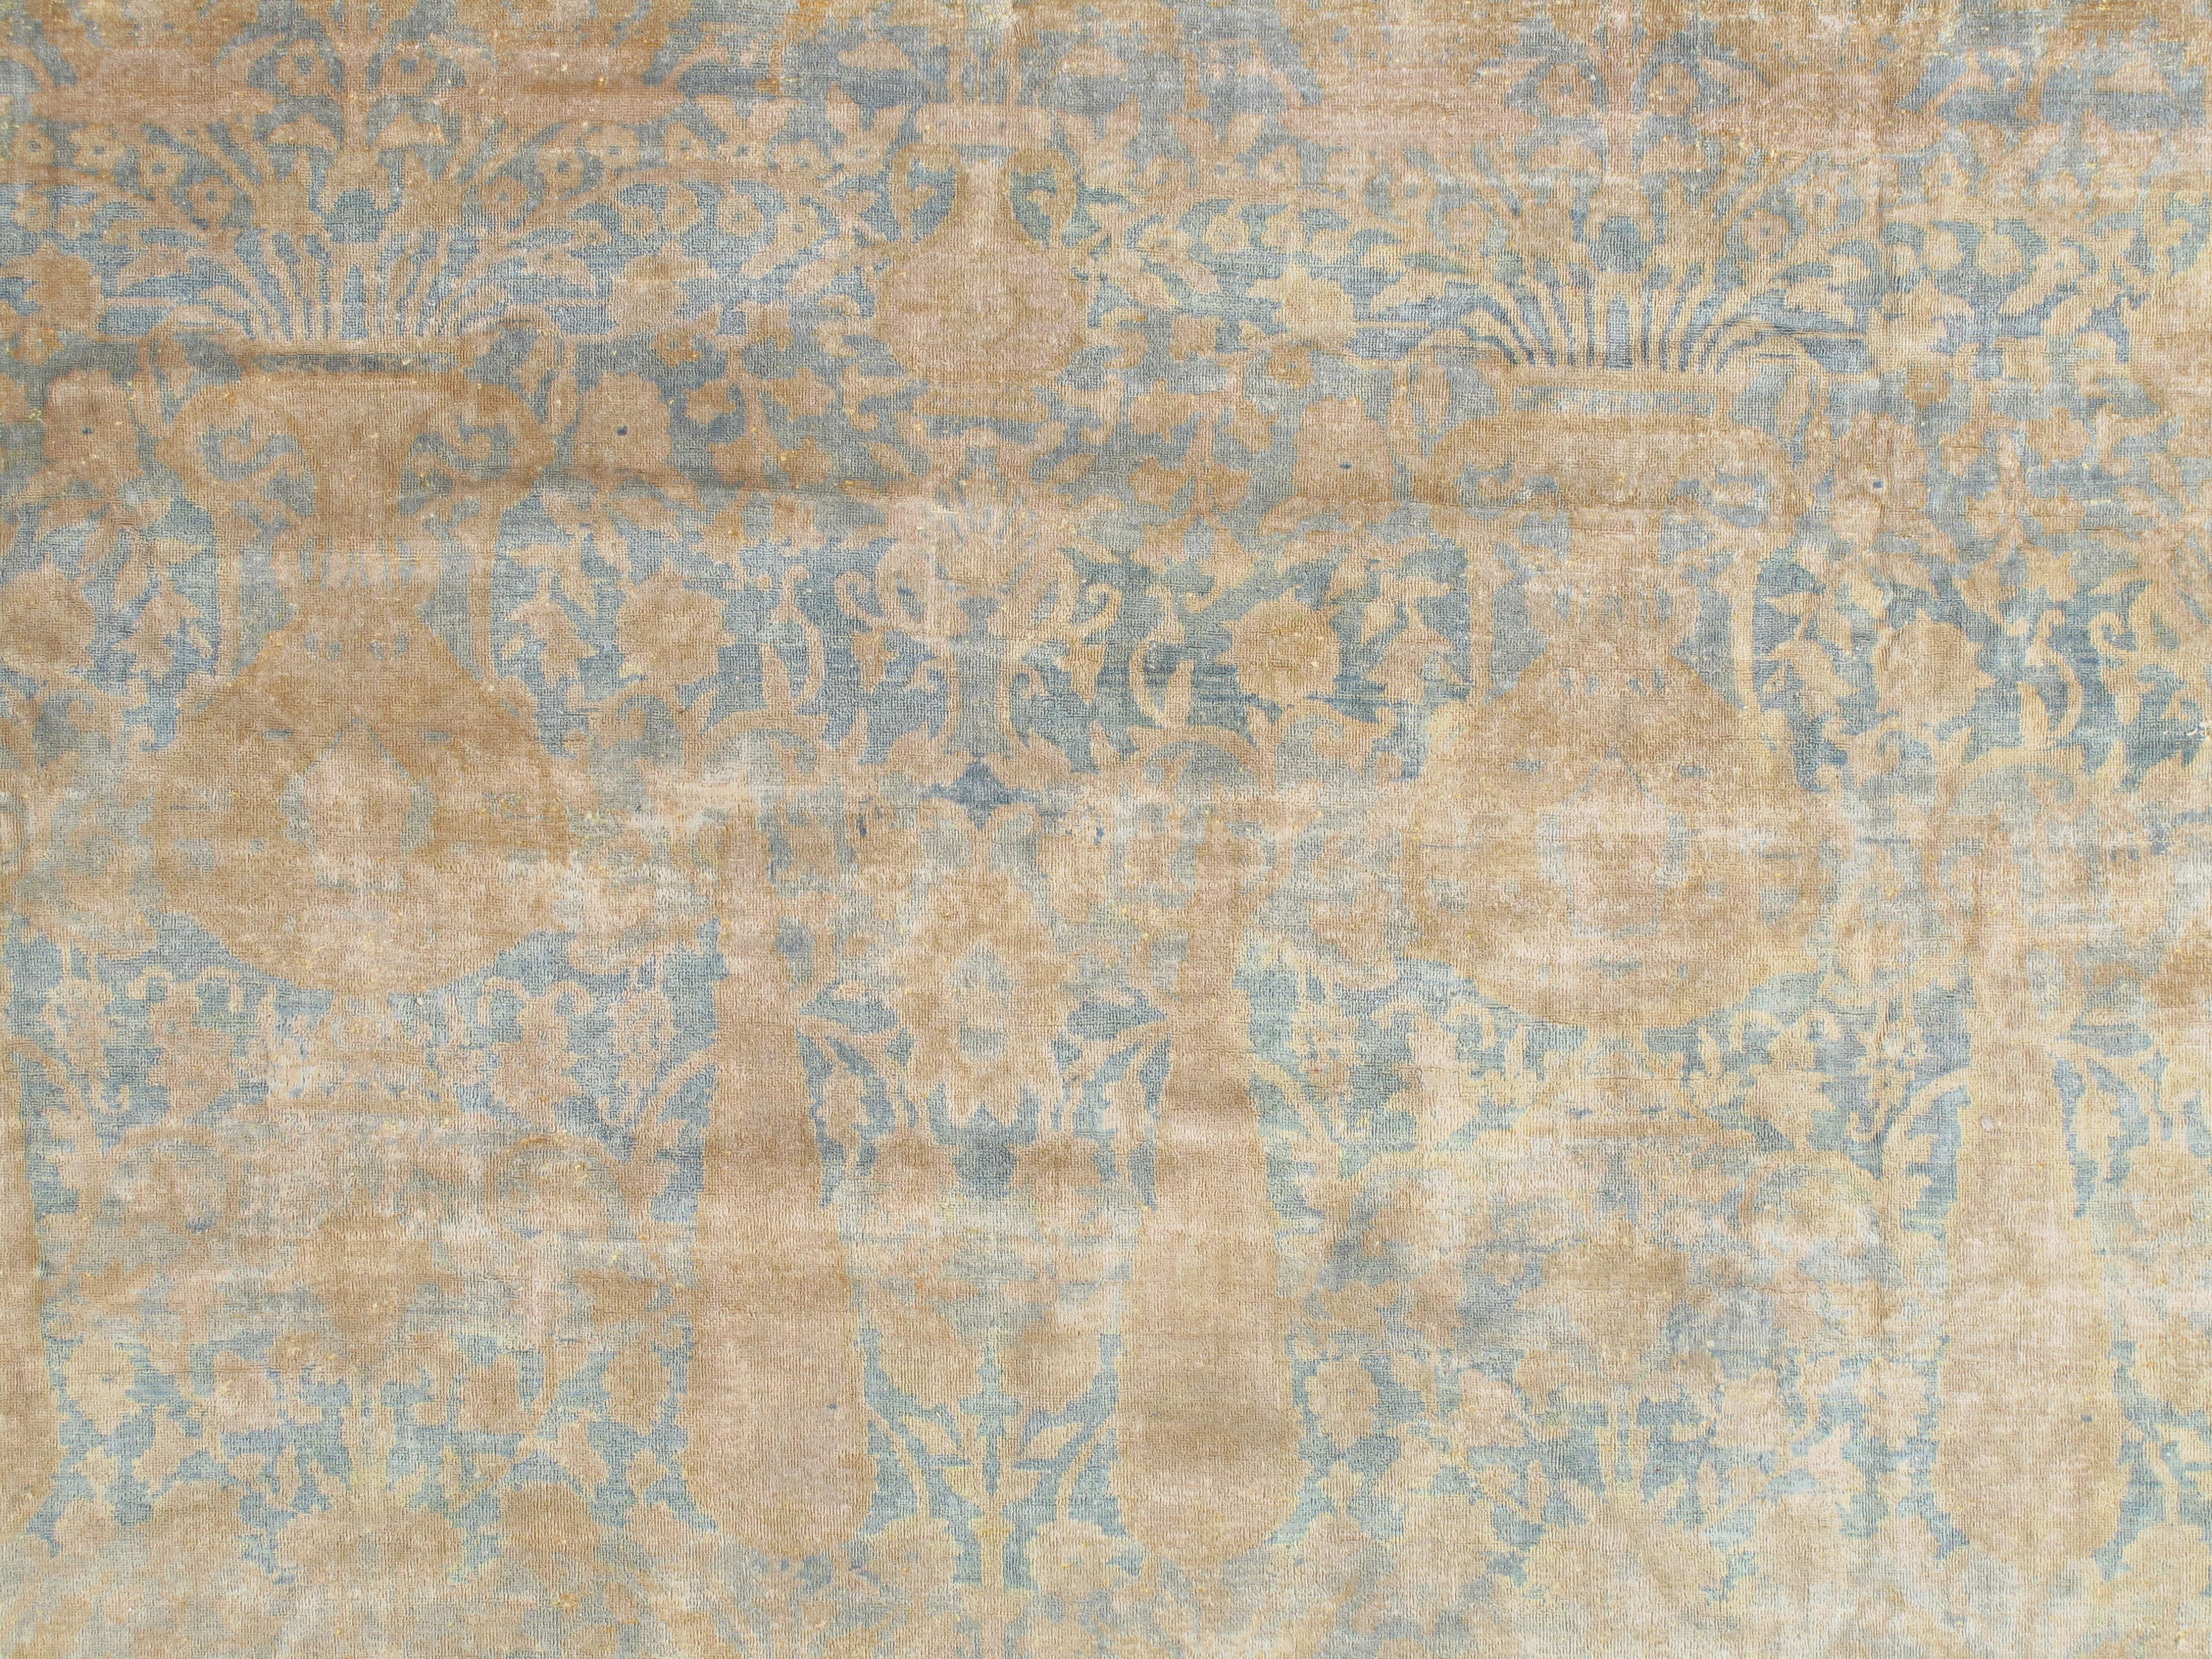 Agra carpets are the most highly sought after of the 19th century antique Indian rugs today. Agra rugs were extremely well made heavy durable rugs and are considered the best of Indian rugs in the post-Mughal period.
Agra rugs are a combination of